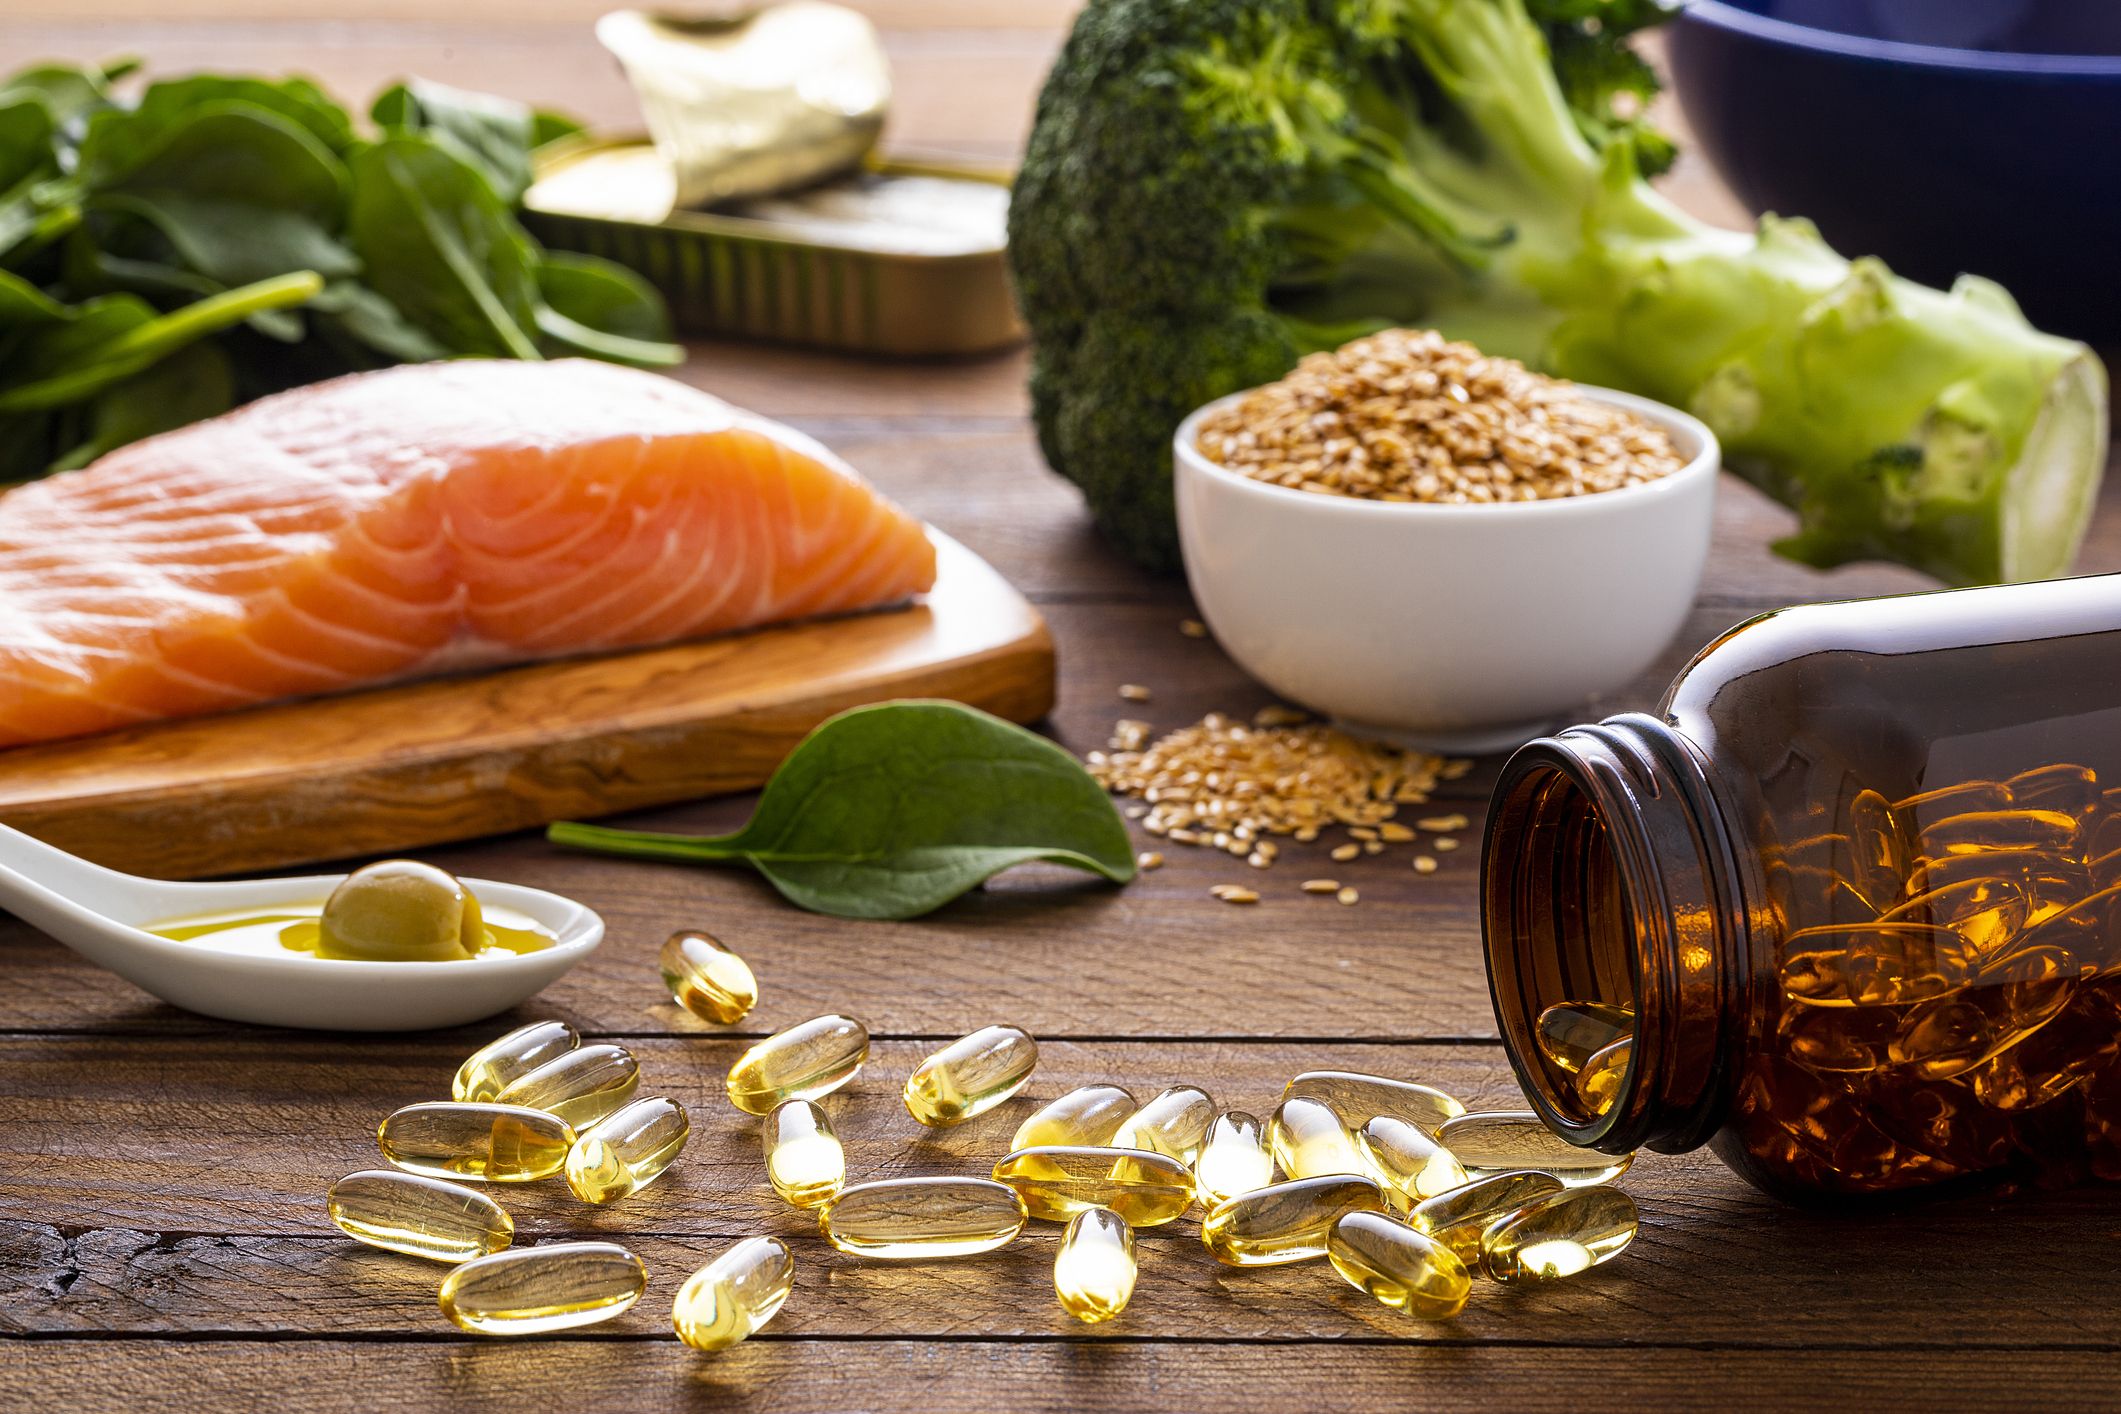 salmon and other sources of omega-3 fatty acids